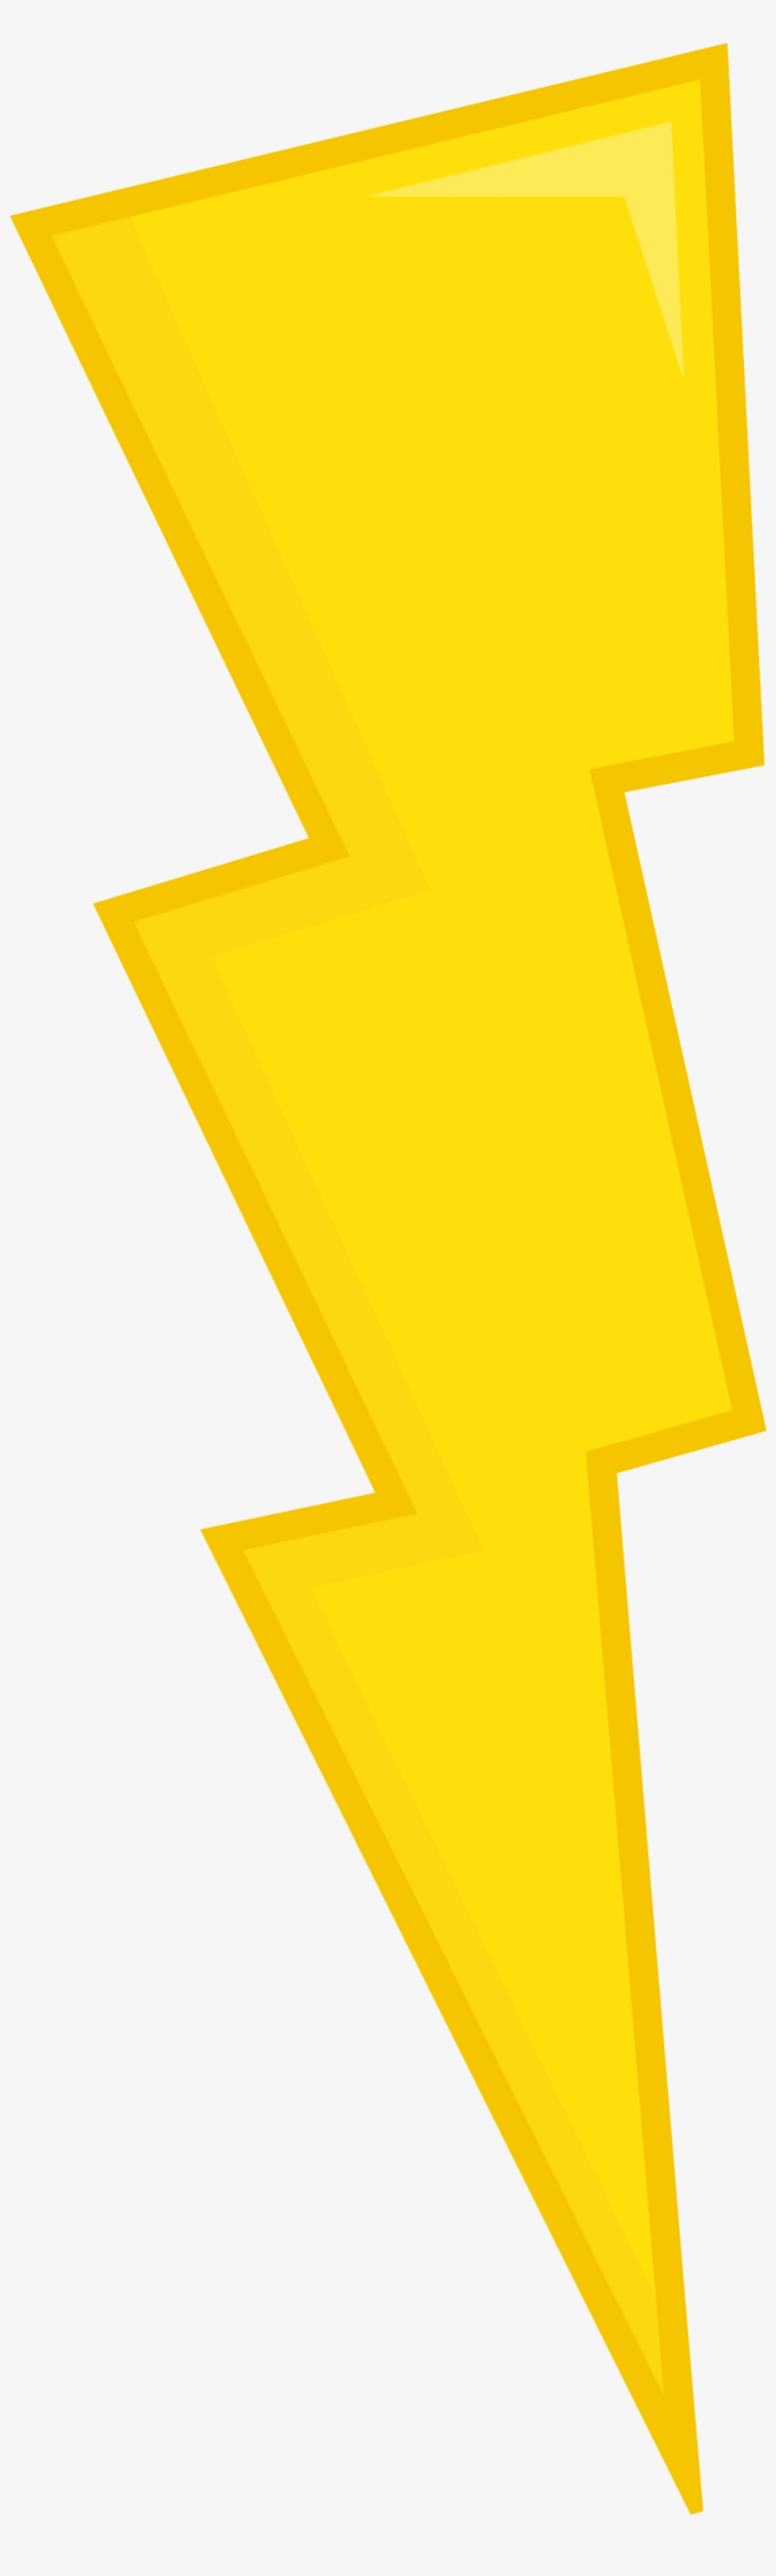 Thunderbolt Asset Or 5 - May 3, transparent png #2028938